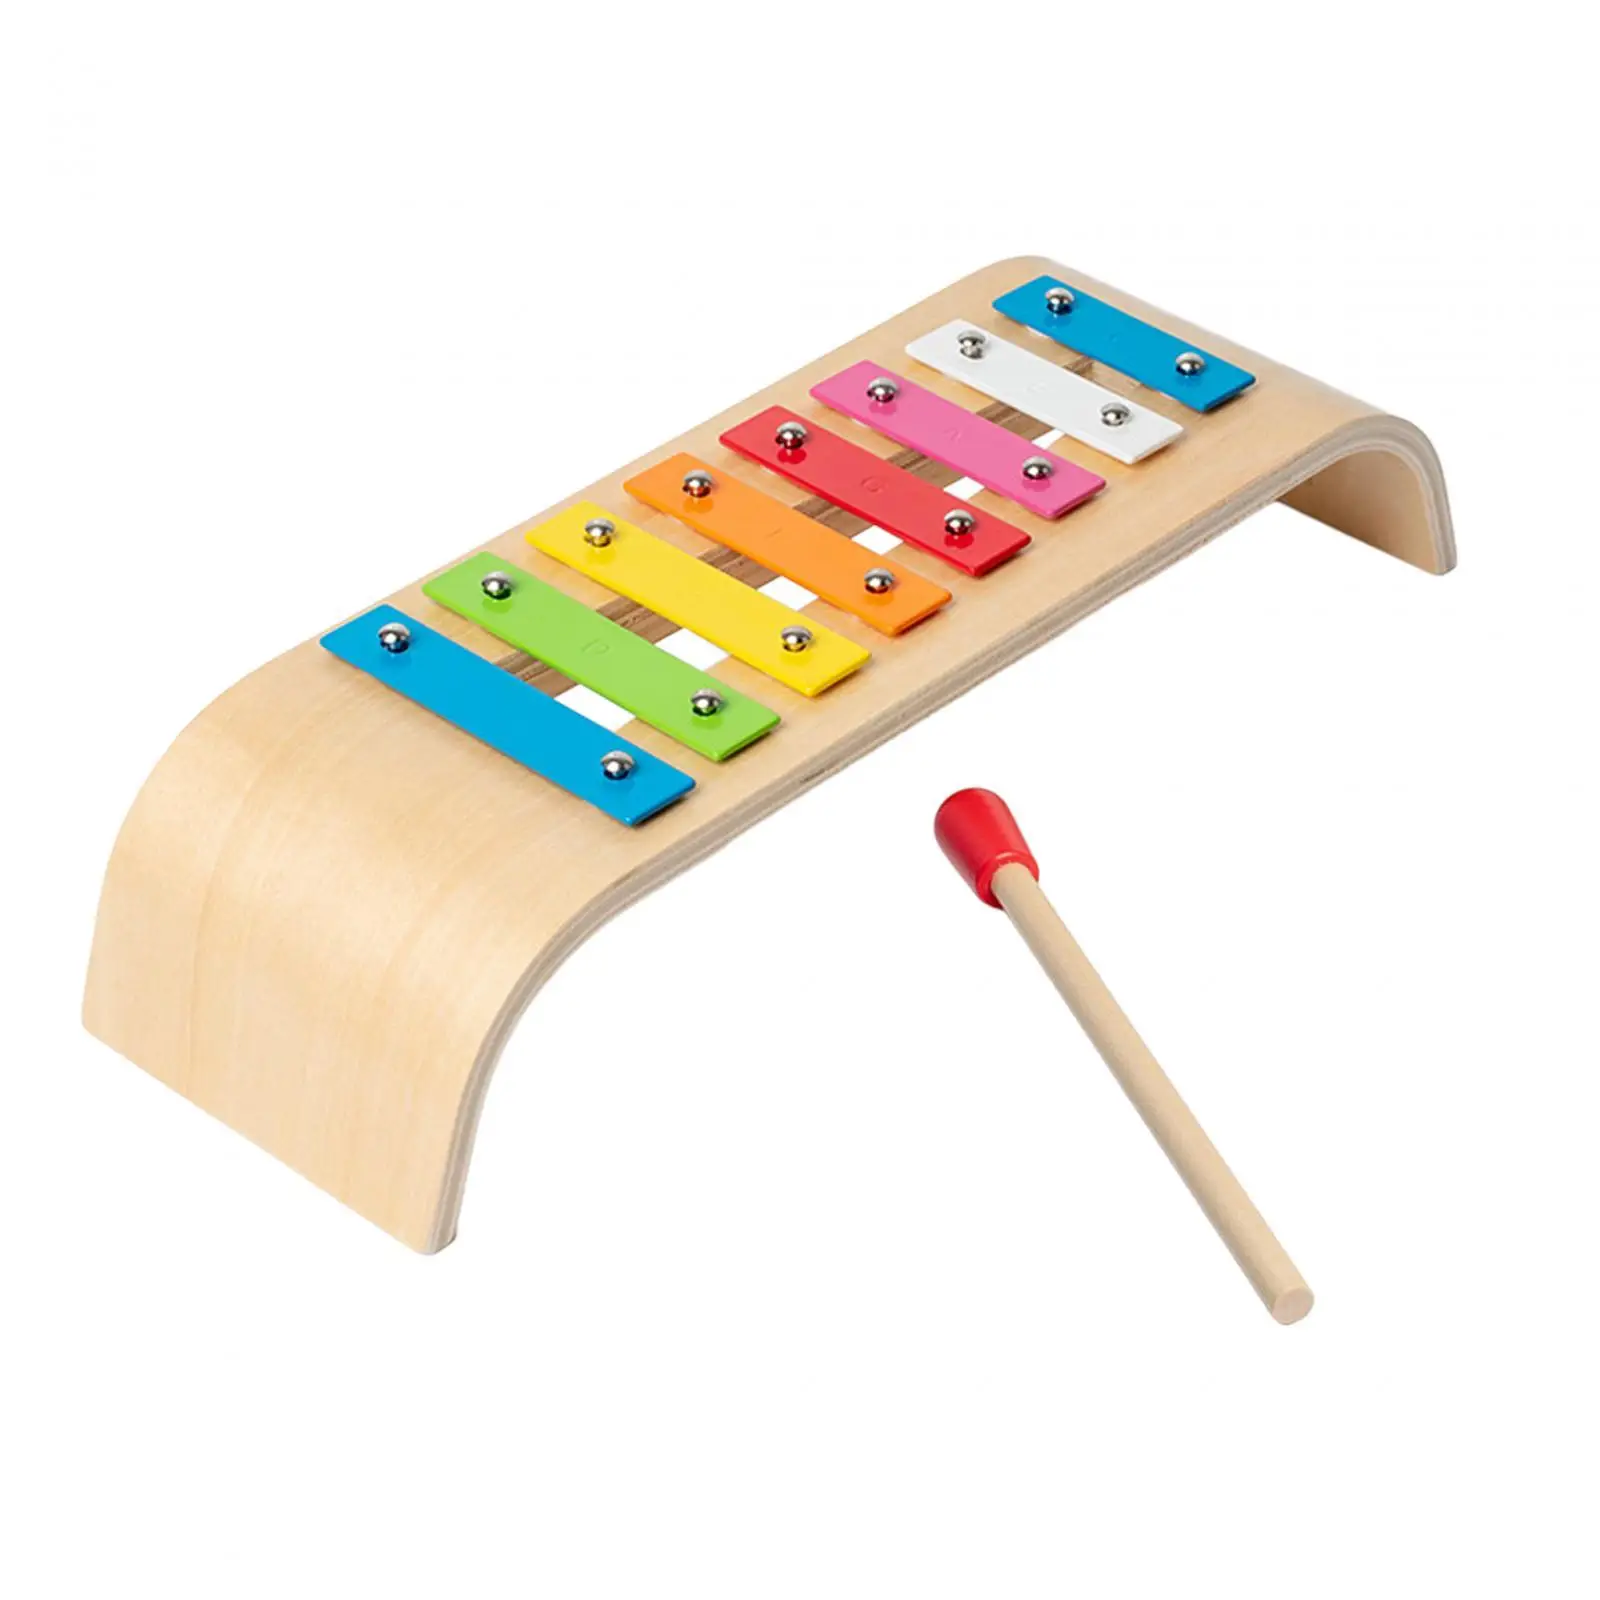 8 Note Xylophone Musical Toy Professional Kids Music Learning Toys for Beginner Kids and Adult Band Birthday Gift Players